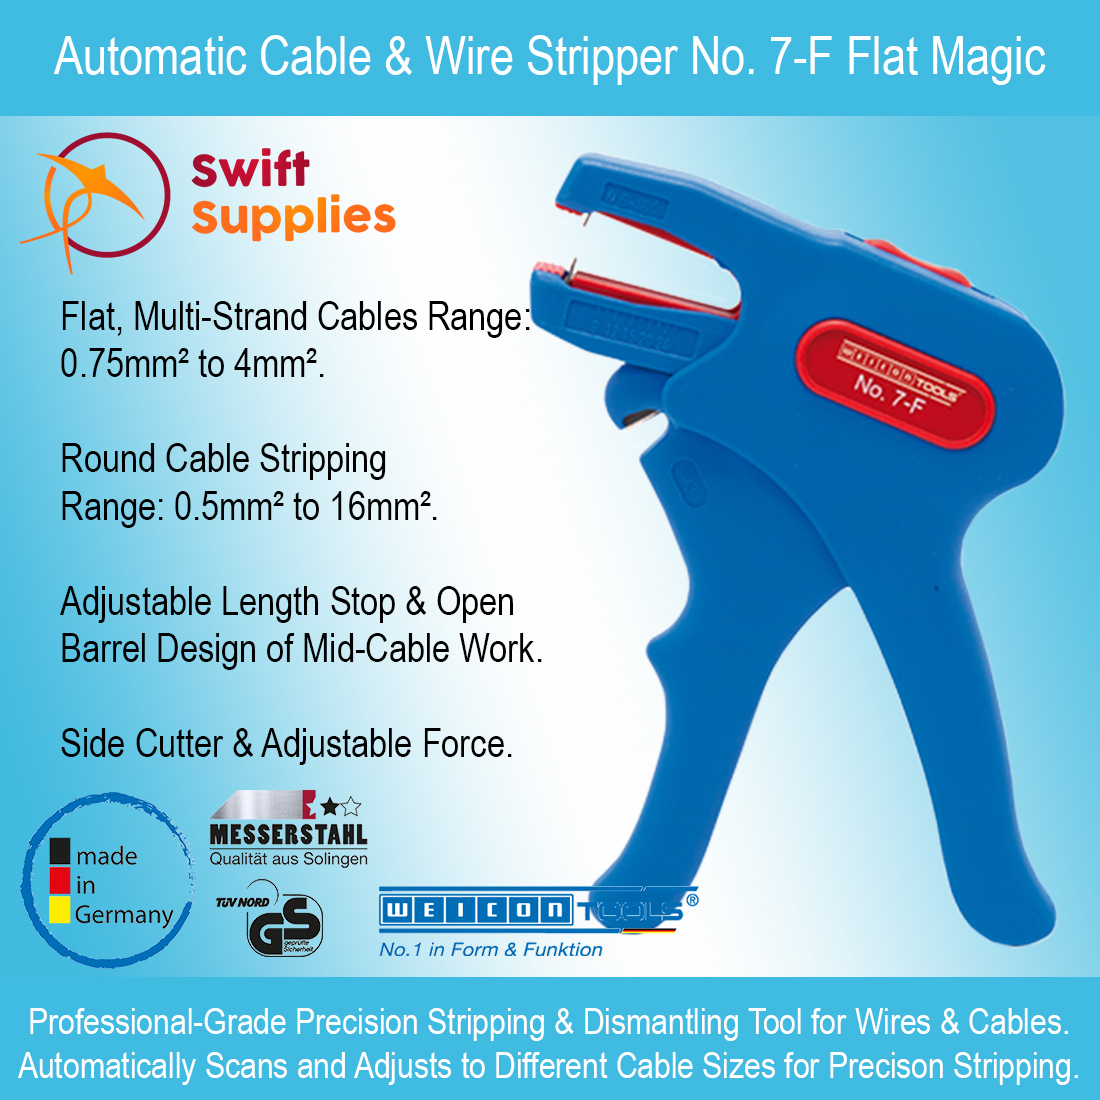 Automatic Cable and Wire Stripper No. 7 Flat Info Image